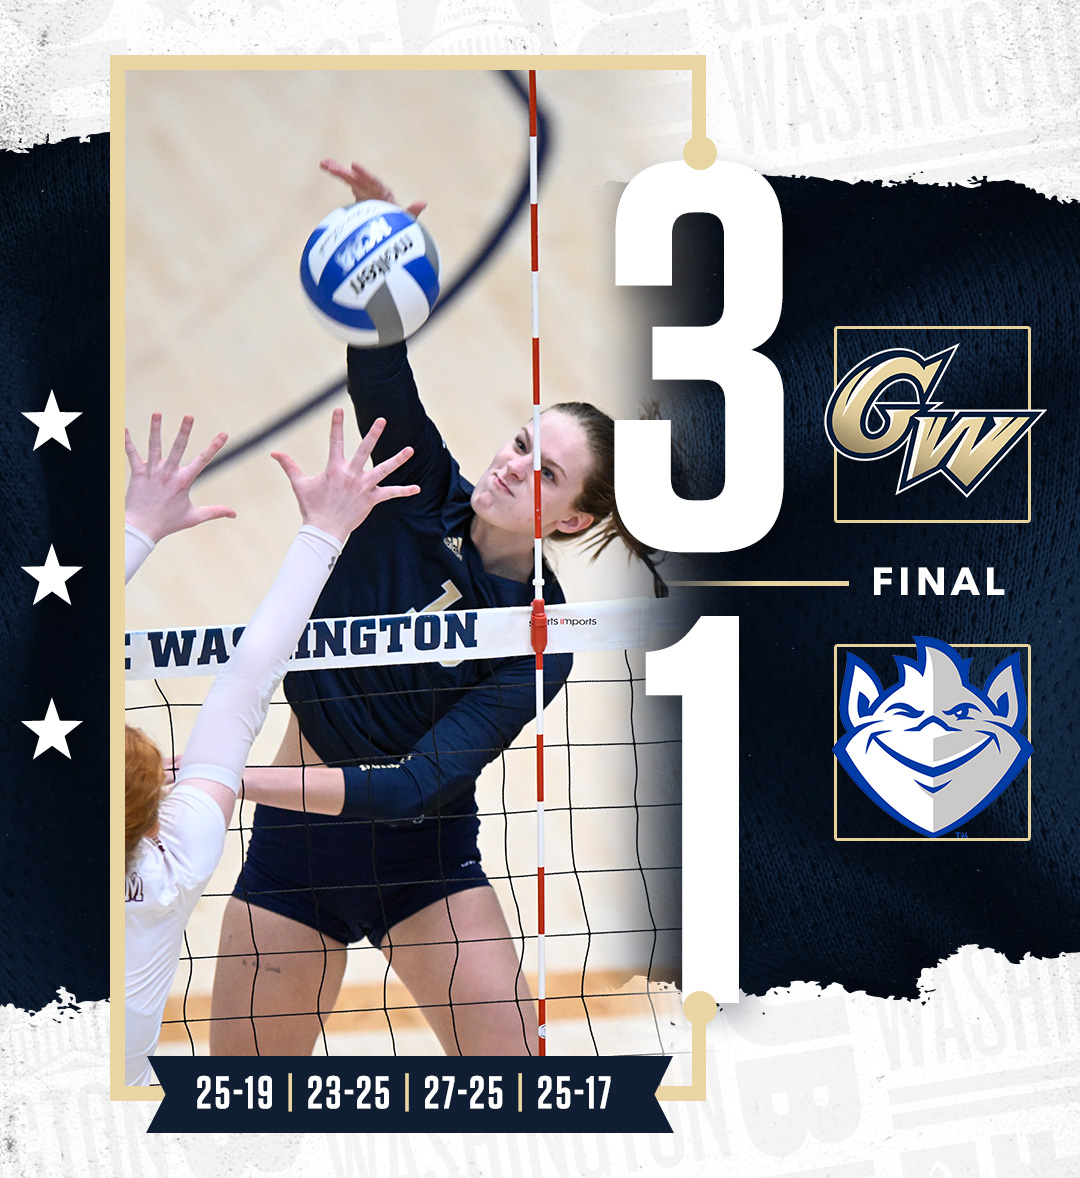 Congrats to 2021 Marian grad MC Daubendiek and her GW Volleyball team on the win…Good Luck in the semis!!! 